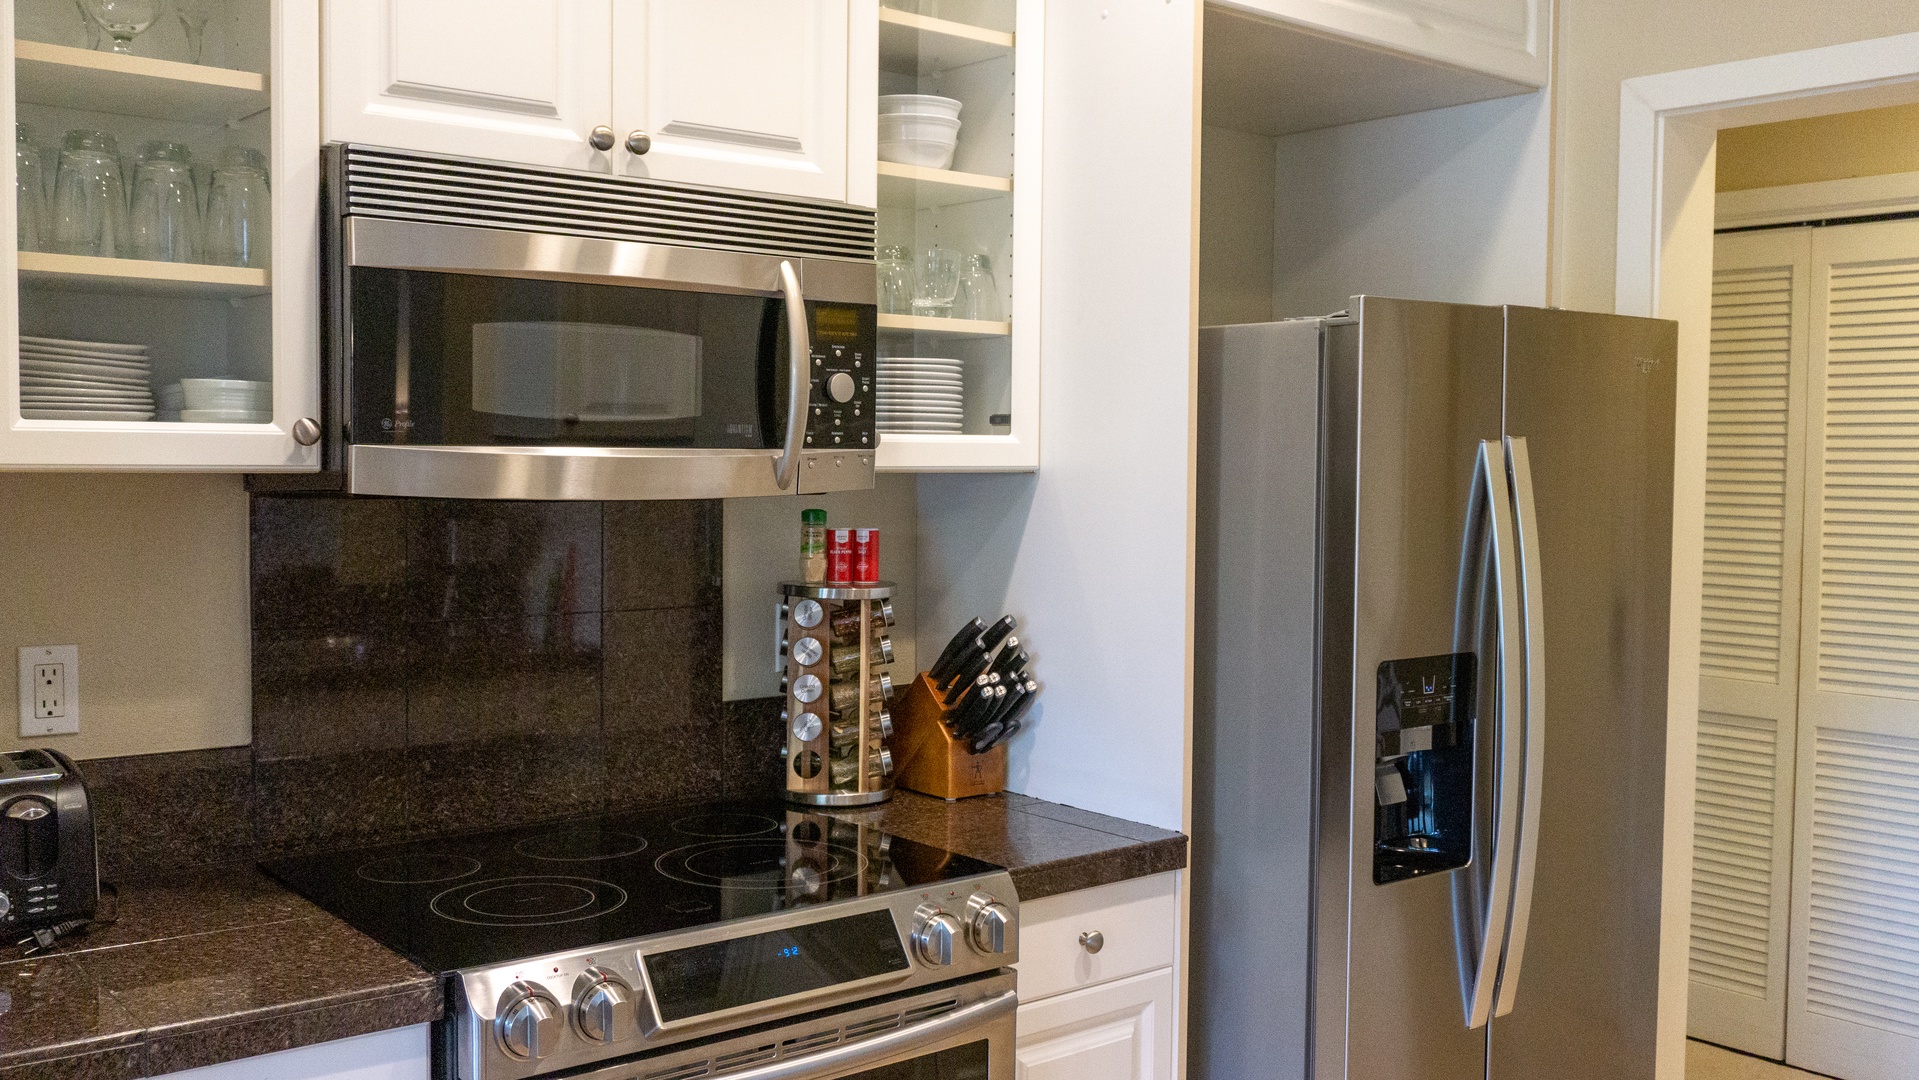 Kapolei Vacation Rentals, Coconut Plantation 1194-3 - The spacious kitchen has all your needs for a relaxing vacation.